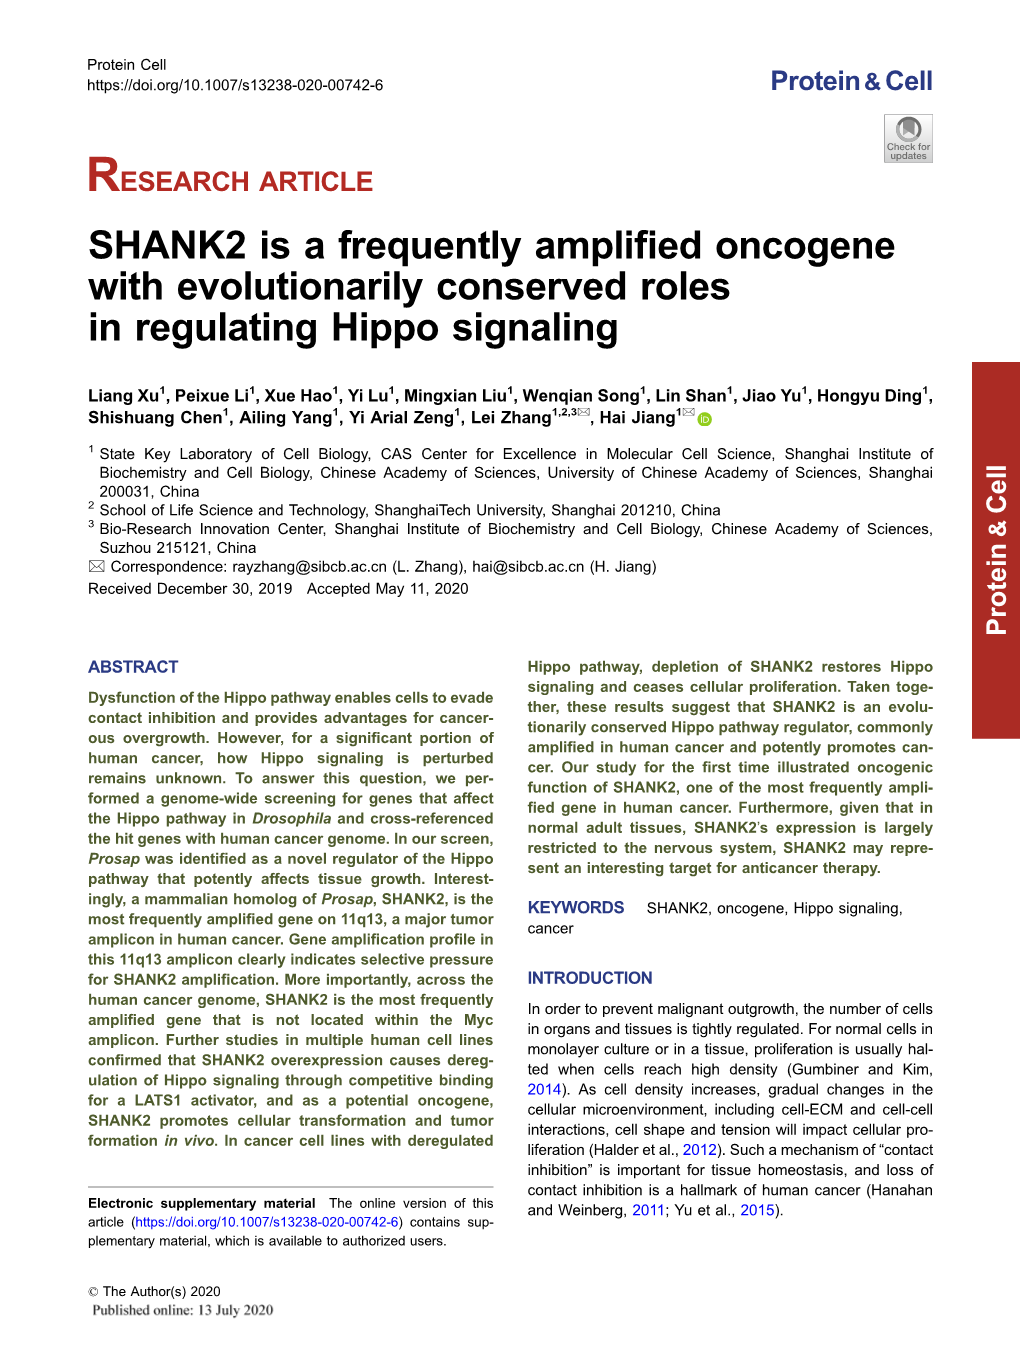 SHANK2 Is a Frequently Amplified Oncogene with Evolutionarily Conserved Roles in Regulating Hippo Signaling